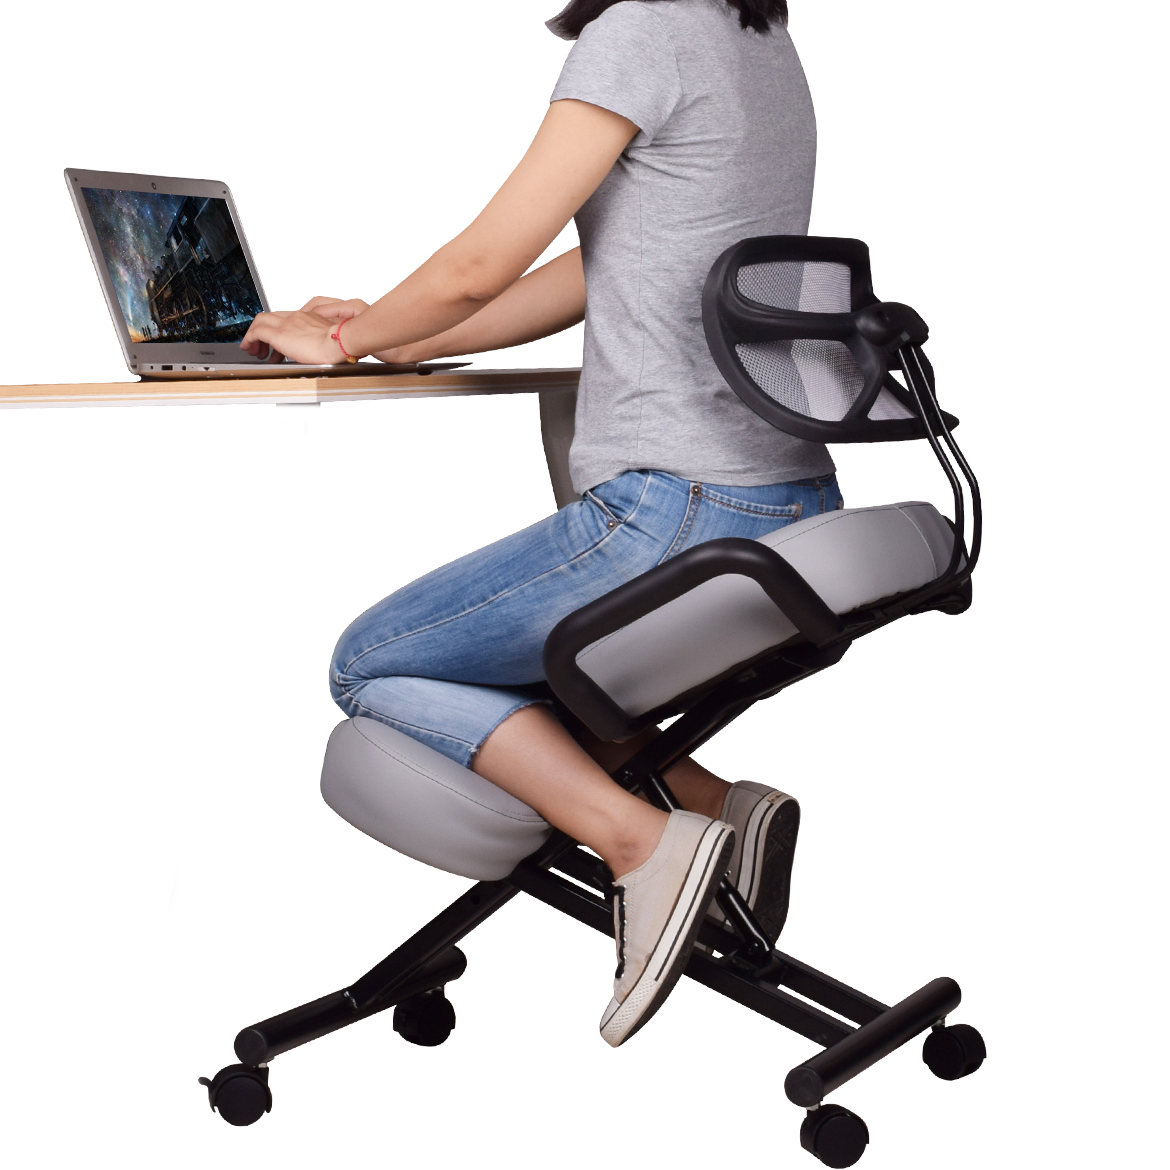 USED DRAGONN (By VIVO) Ergonomic Kneeling Chair with Back Support, Gray